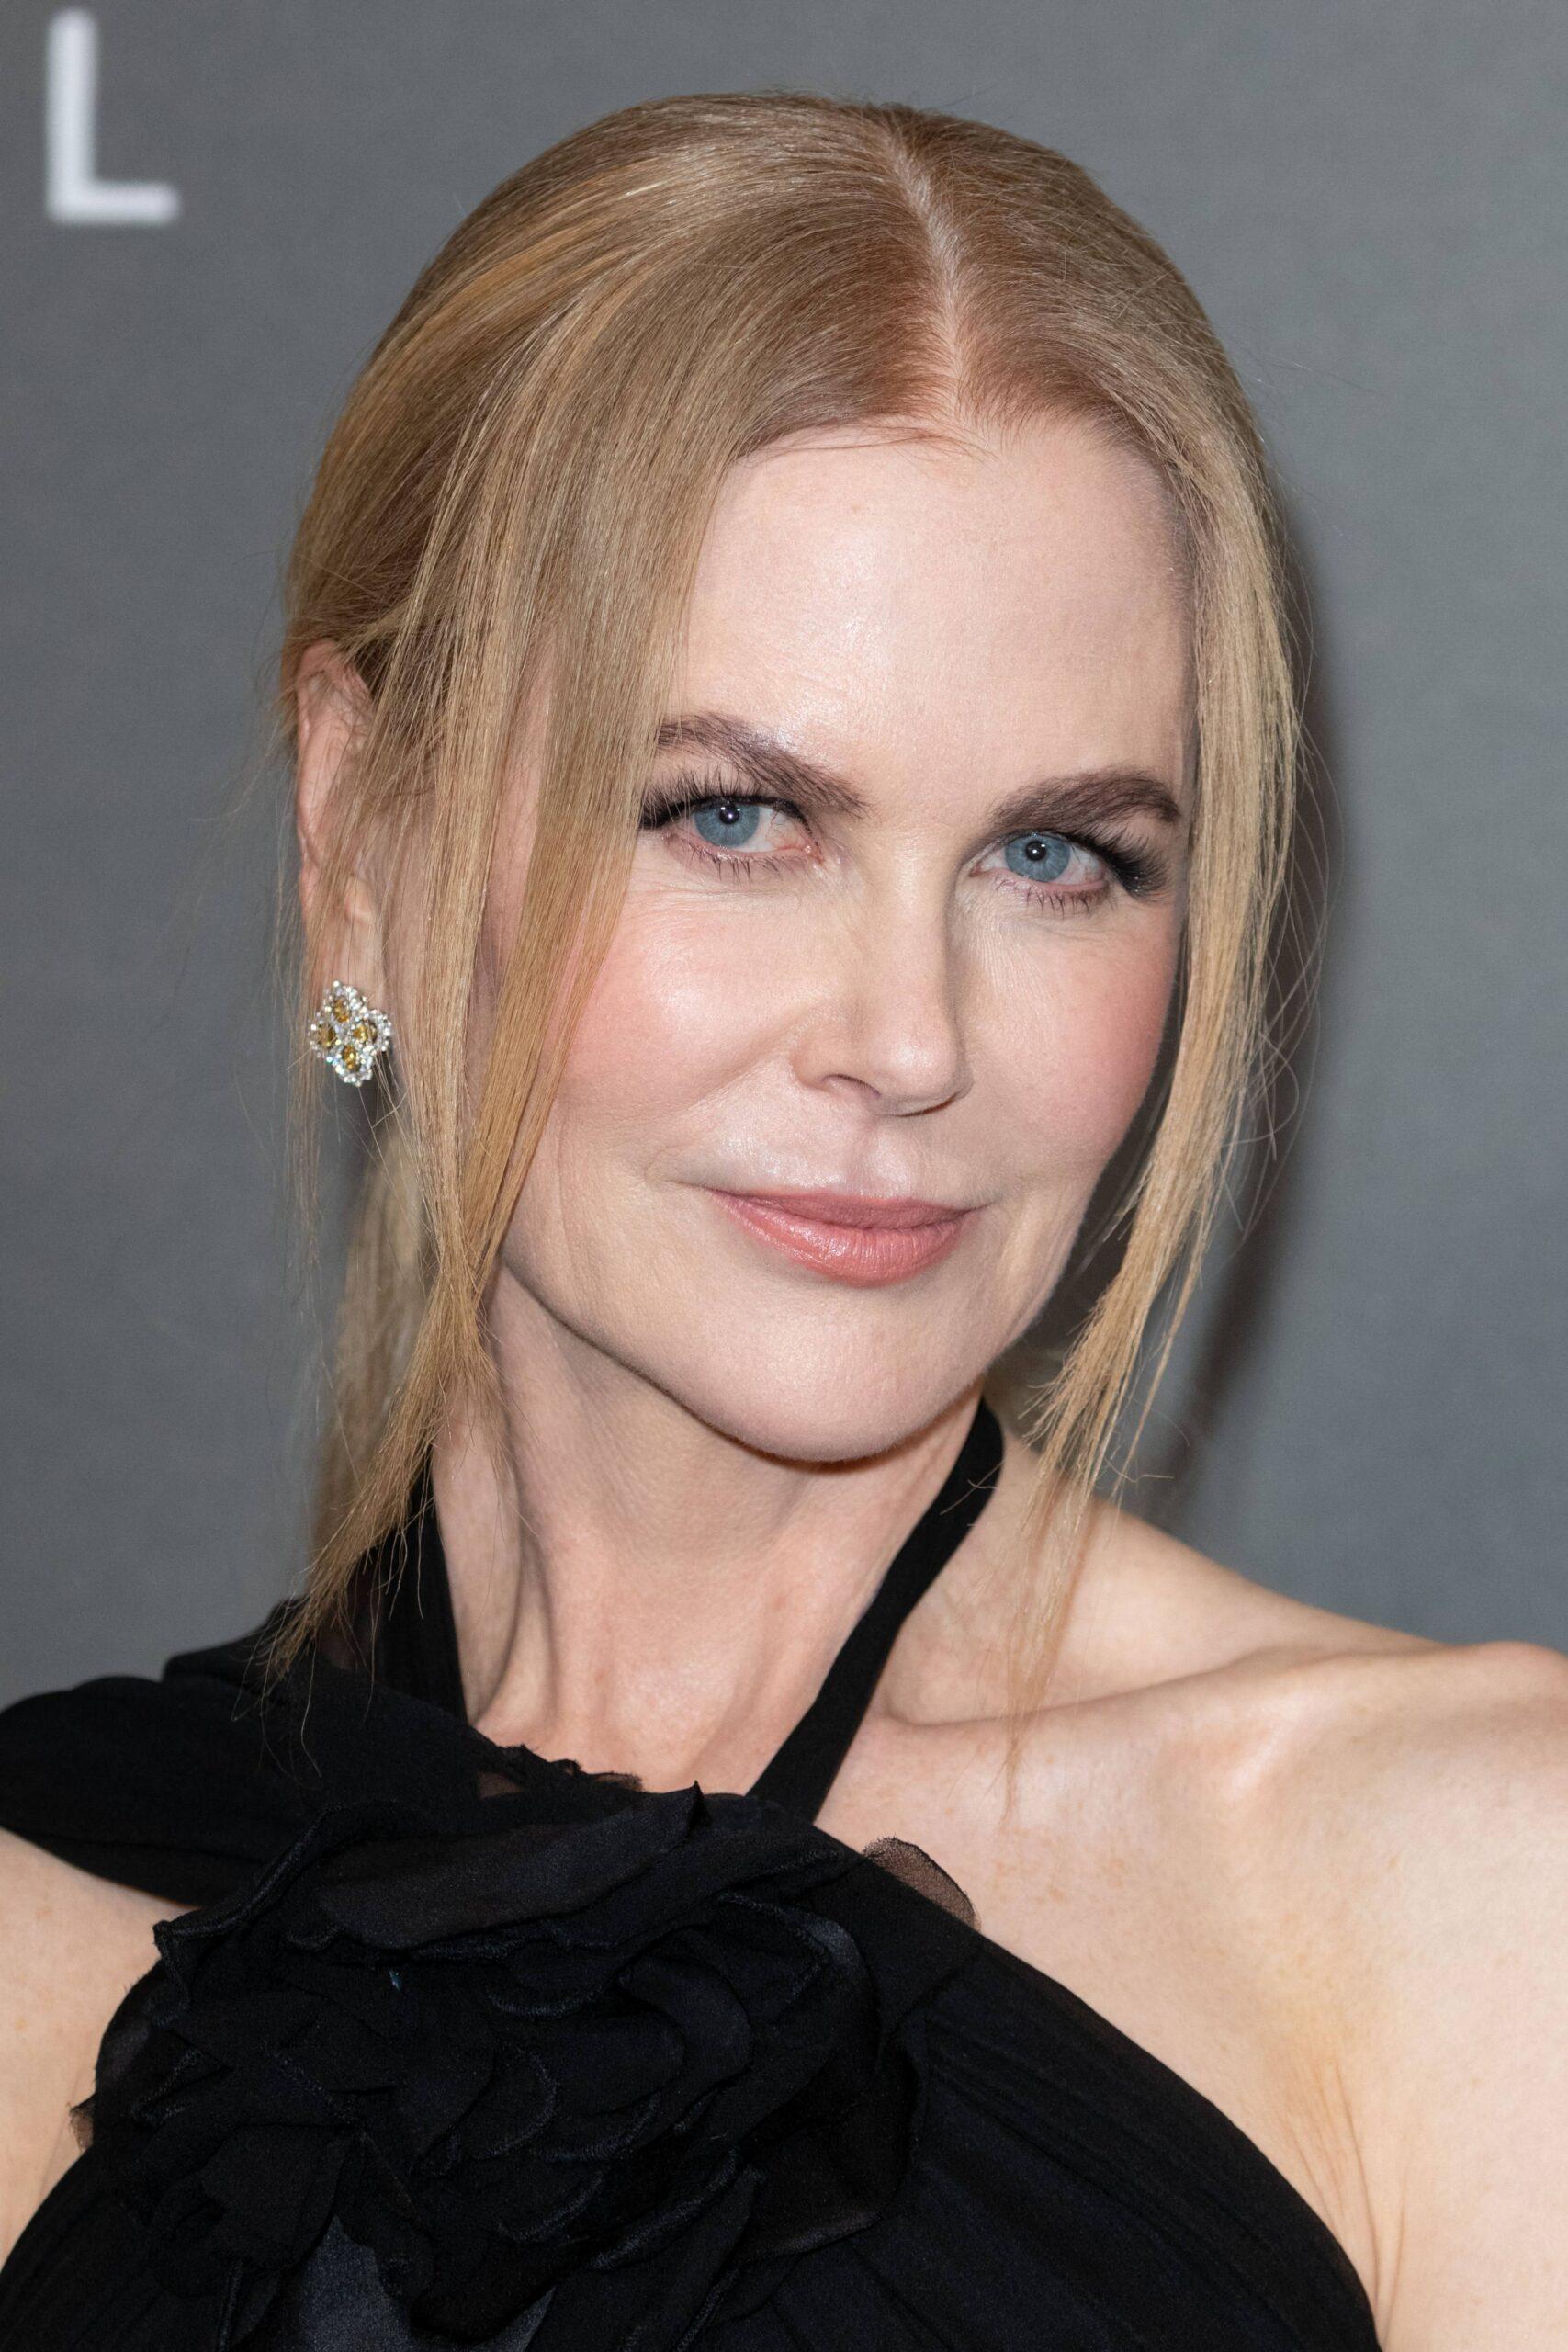 Nicole Kidman Goes Braless In An Ab-Baring Gown For 'Special Ops: Lioness' Screening